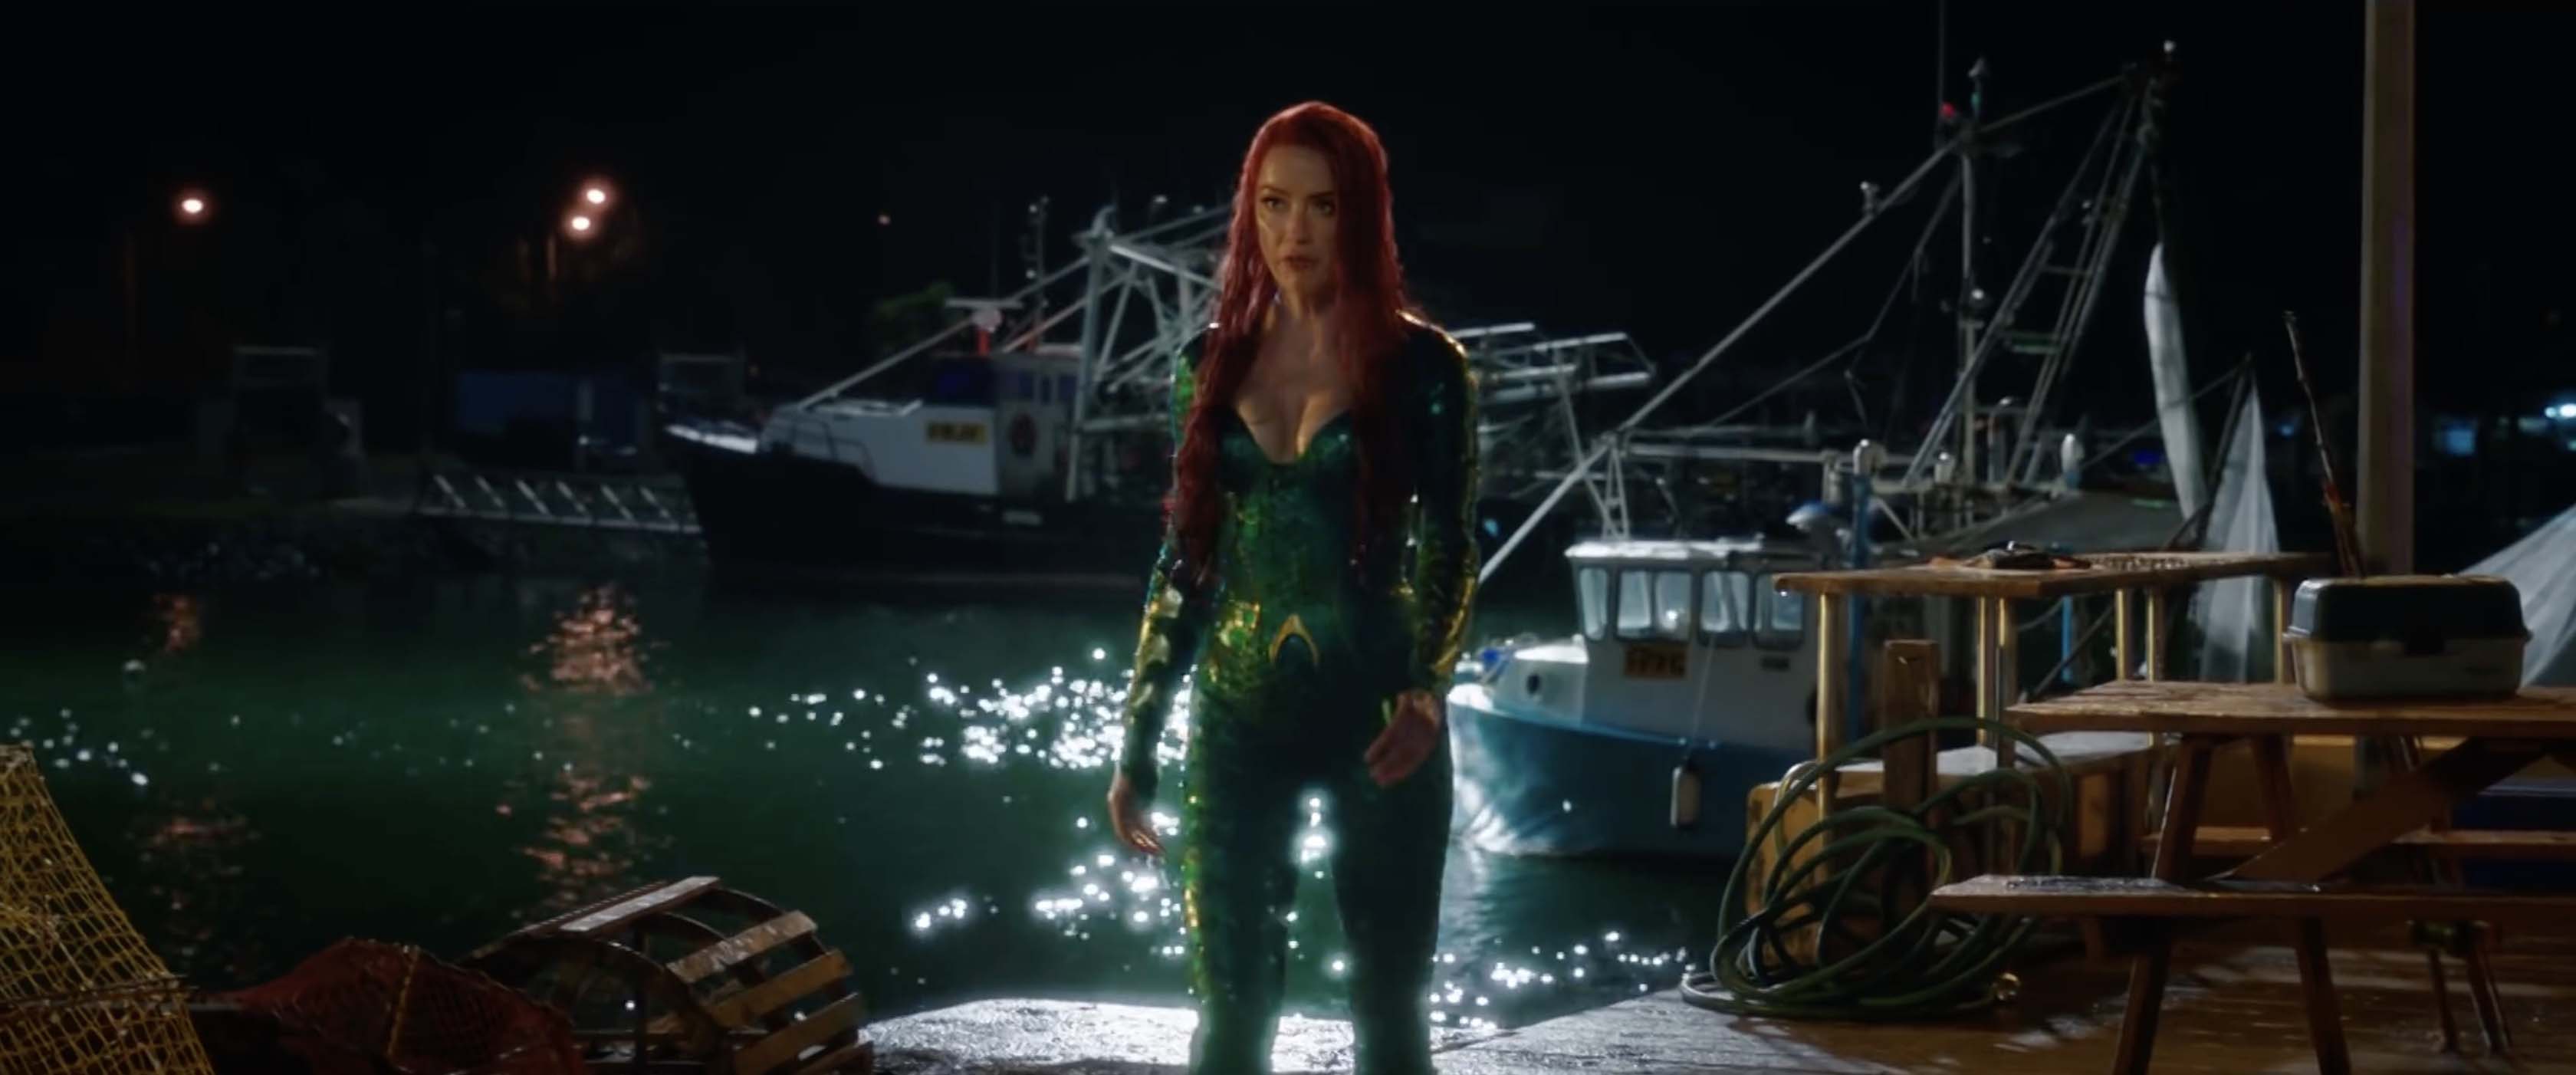 Aquaman Trailer - Our First Look at the King of the Seven Seas  The Nerdy